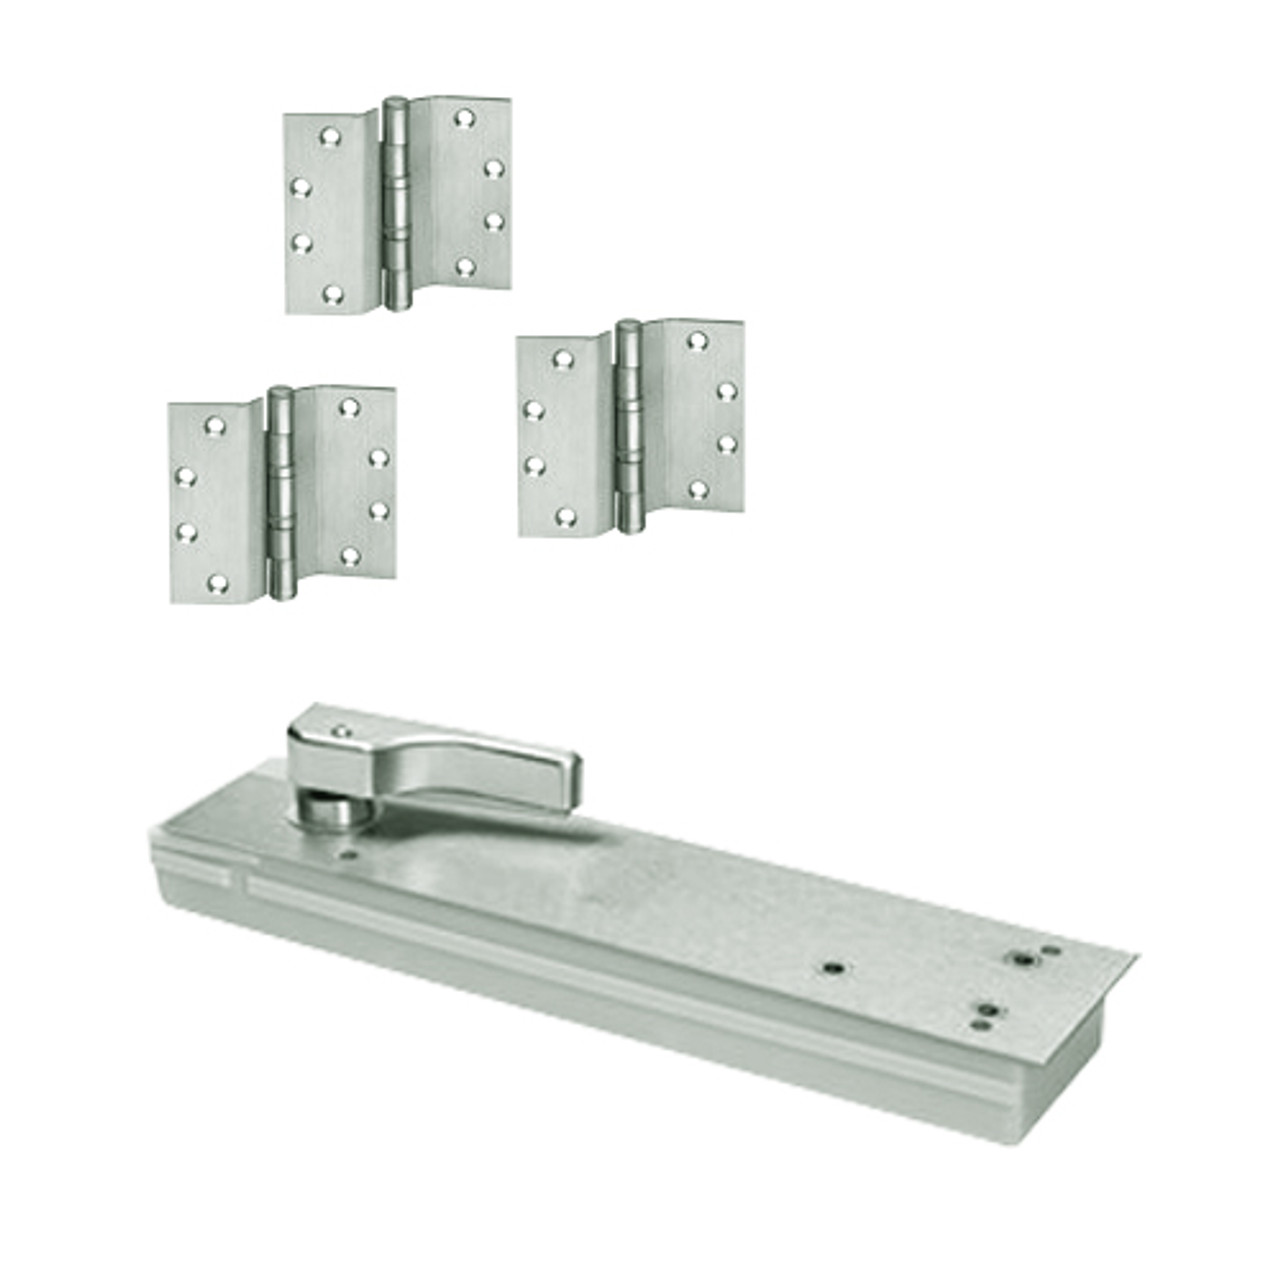 HM5103ABC90-RH-618 Rixson HM51 Series 3/4" Offset Hung Shallow Depth Floor Closers in Bright Nickel Finish